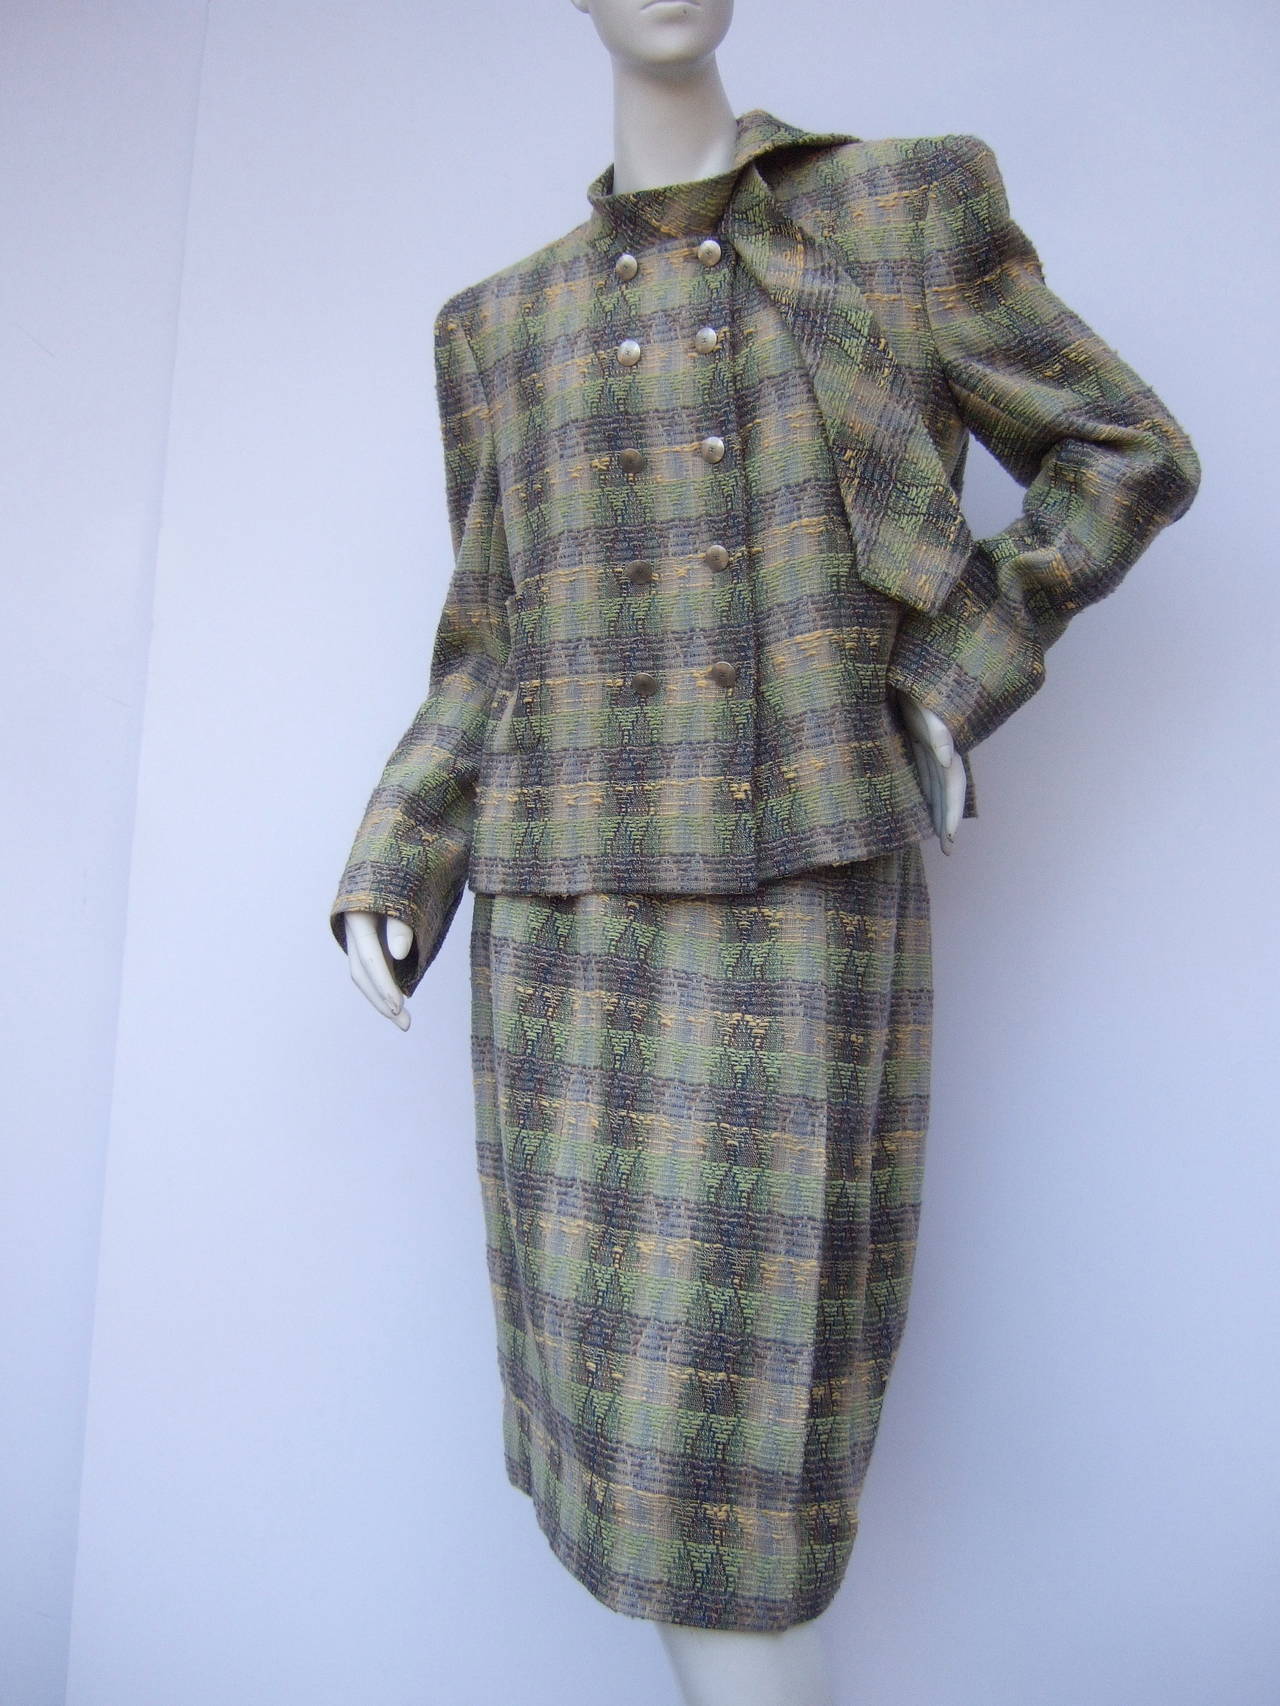 Chanel Boutique Elegant wool & silk knit skirt suit Size 44
The chic skirt suit is designed with chunky wool & silk blend fabric in pale green, grey & yellow hues. The stylish jacket is designed with sixteen Chanel silver metal logo buttons. The